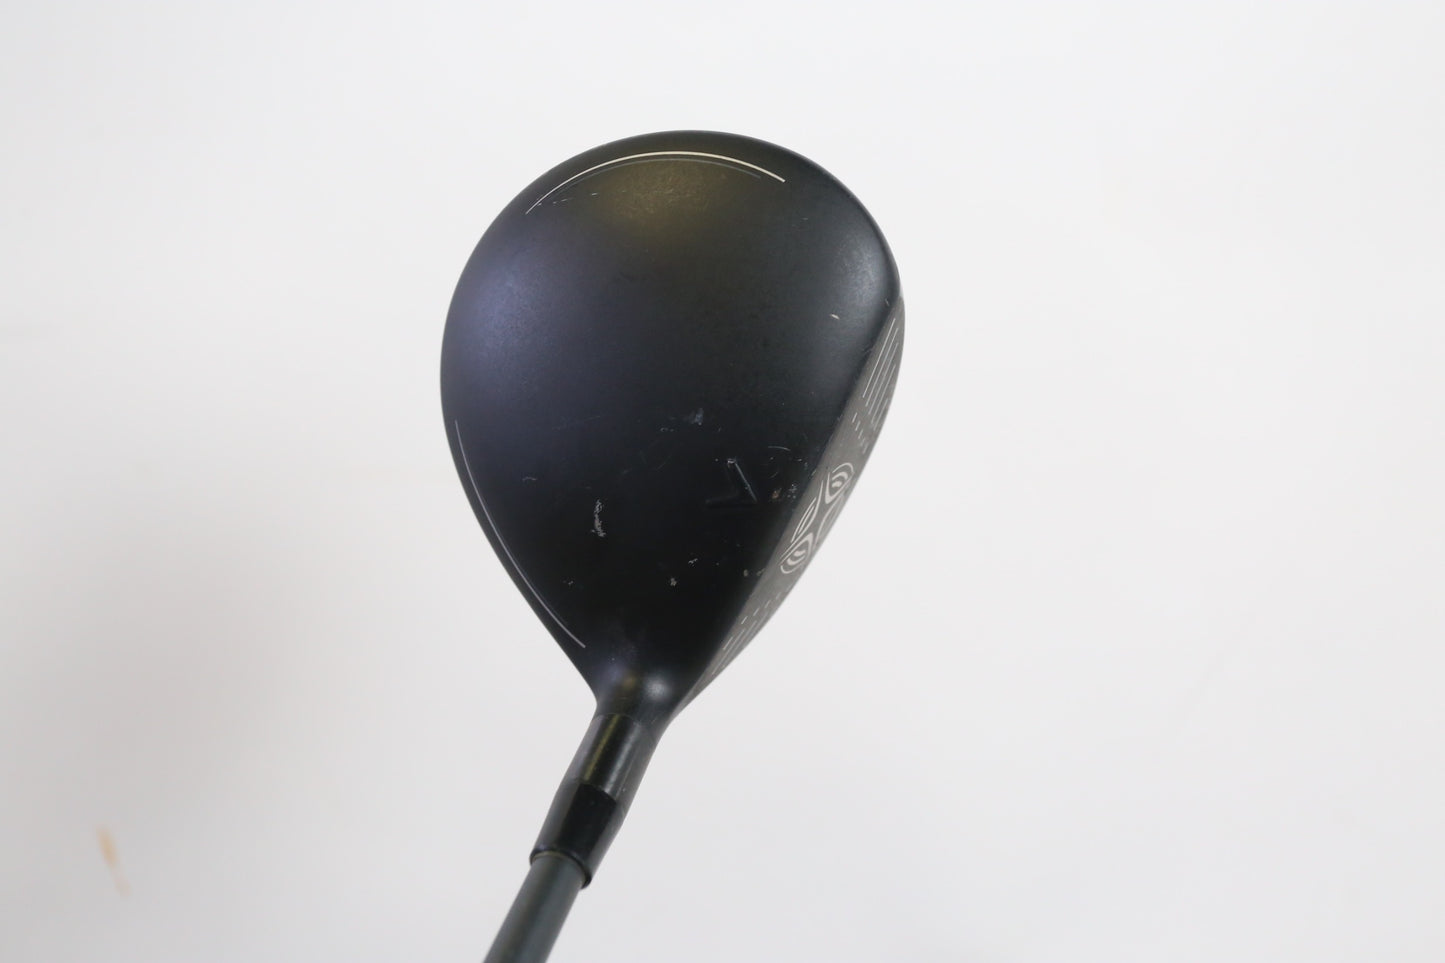 Used Callaway XR 16 5-Wood - Left-Handed - Not Specified Degrees - Regular Flex